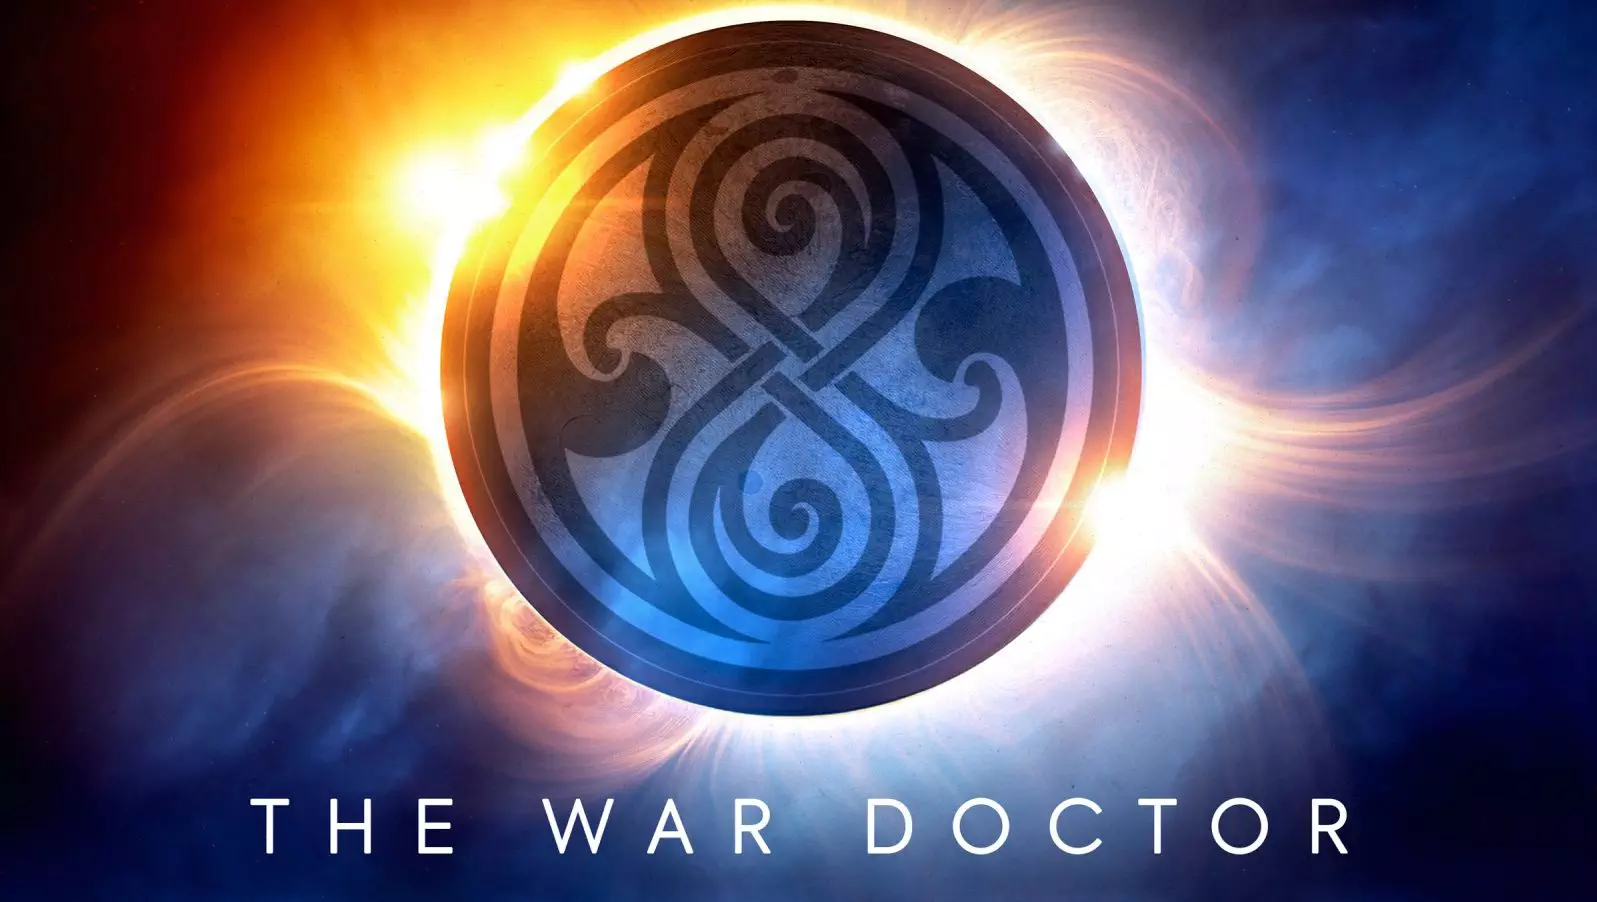 The War Doctor Rises in new Doctor Who audio dramas coming to Big Finish Productions